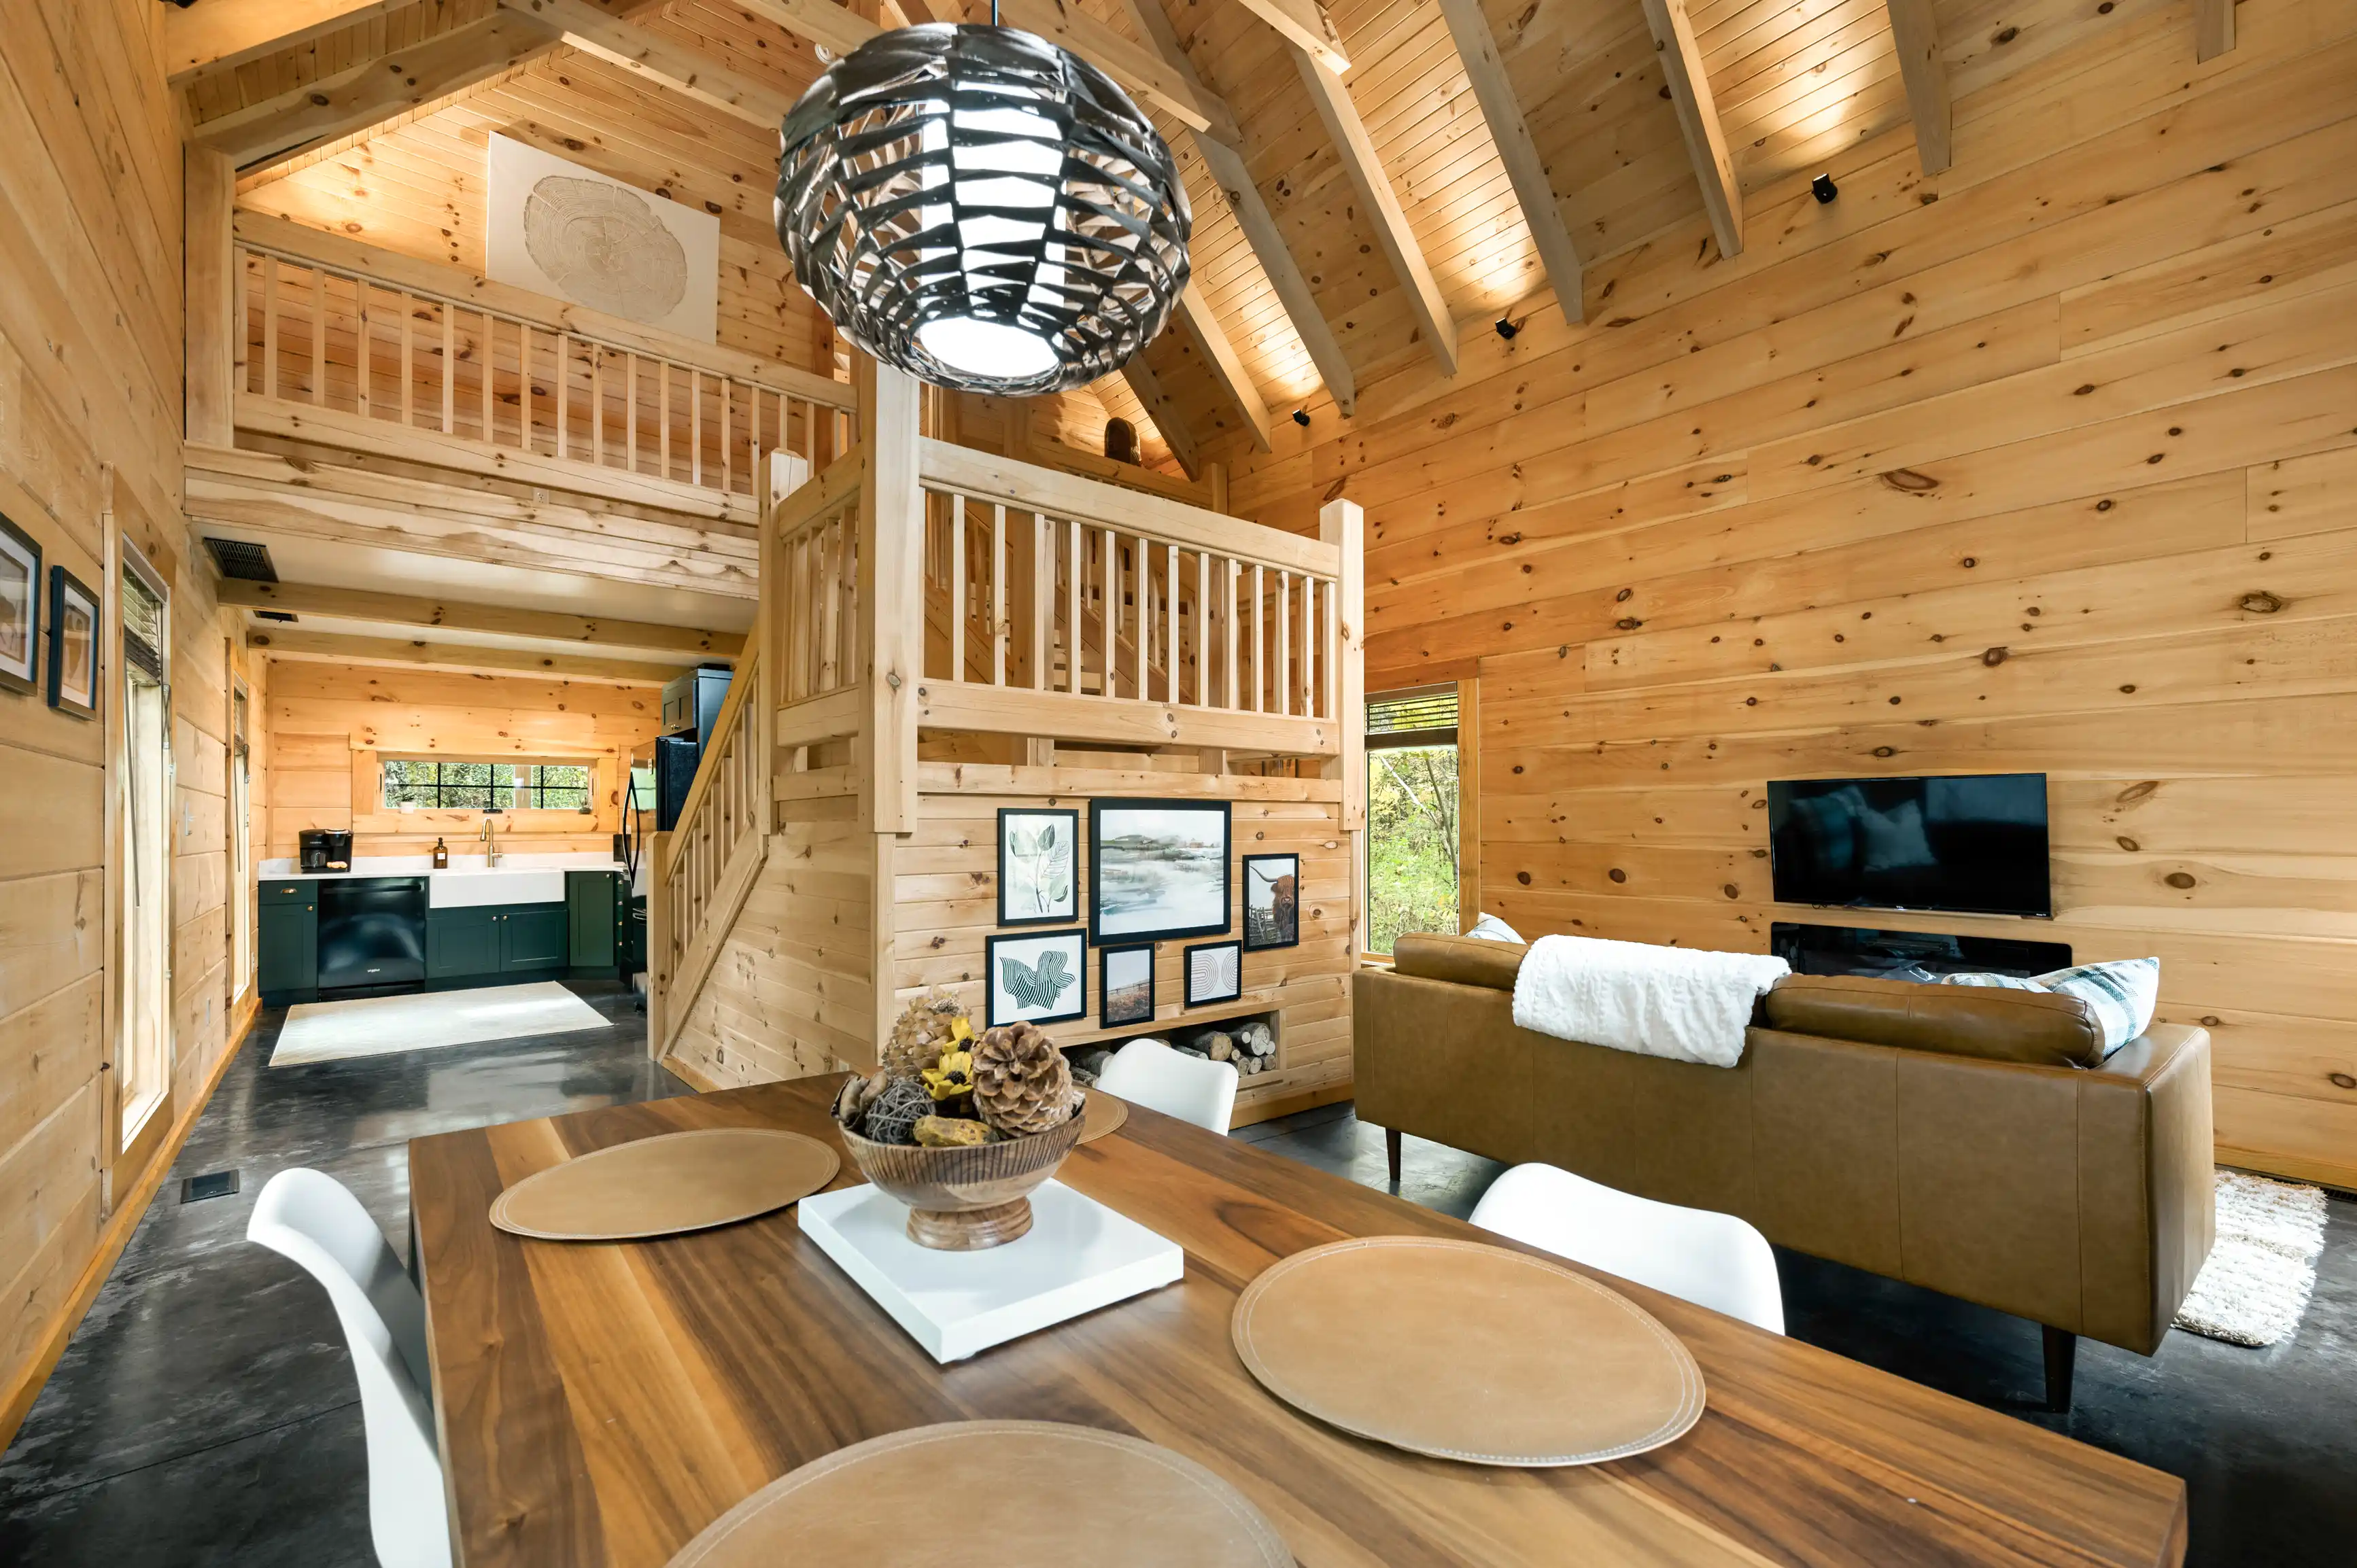 Interior of a cozy wooden cabin with a modern kitchen, a living room with a flat-screen TV, comfortable furniture, a loft area accessed by stairs, and a distinctive hanging light fixture.